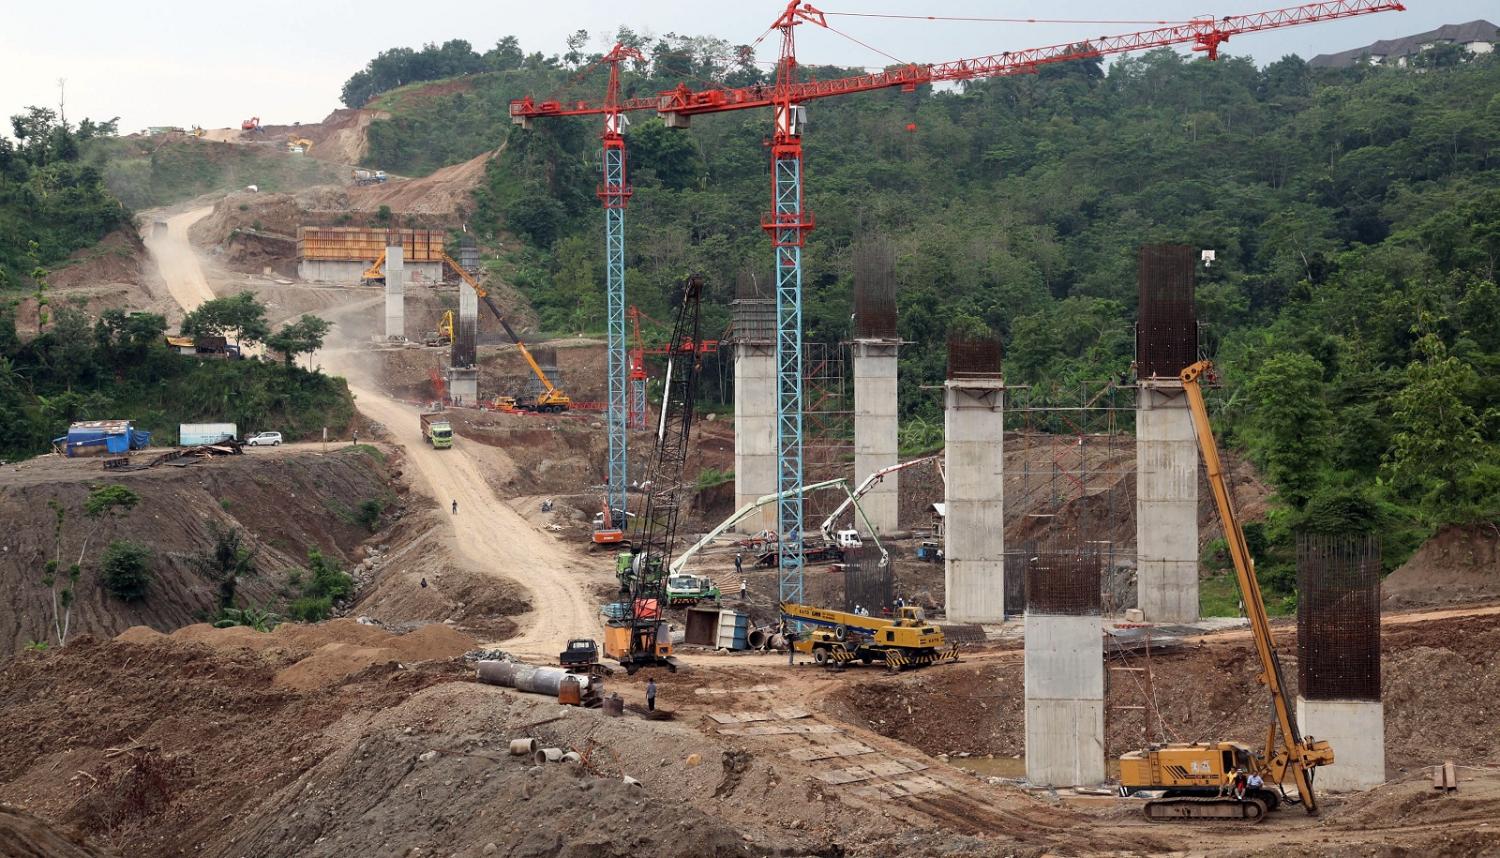  Highway construction in Semarang, Indonesia. (Photo: Dimas Ardian/via Getty Images)